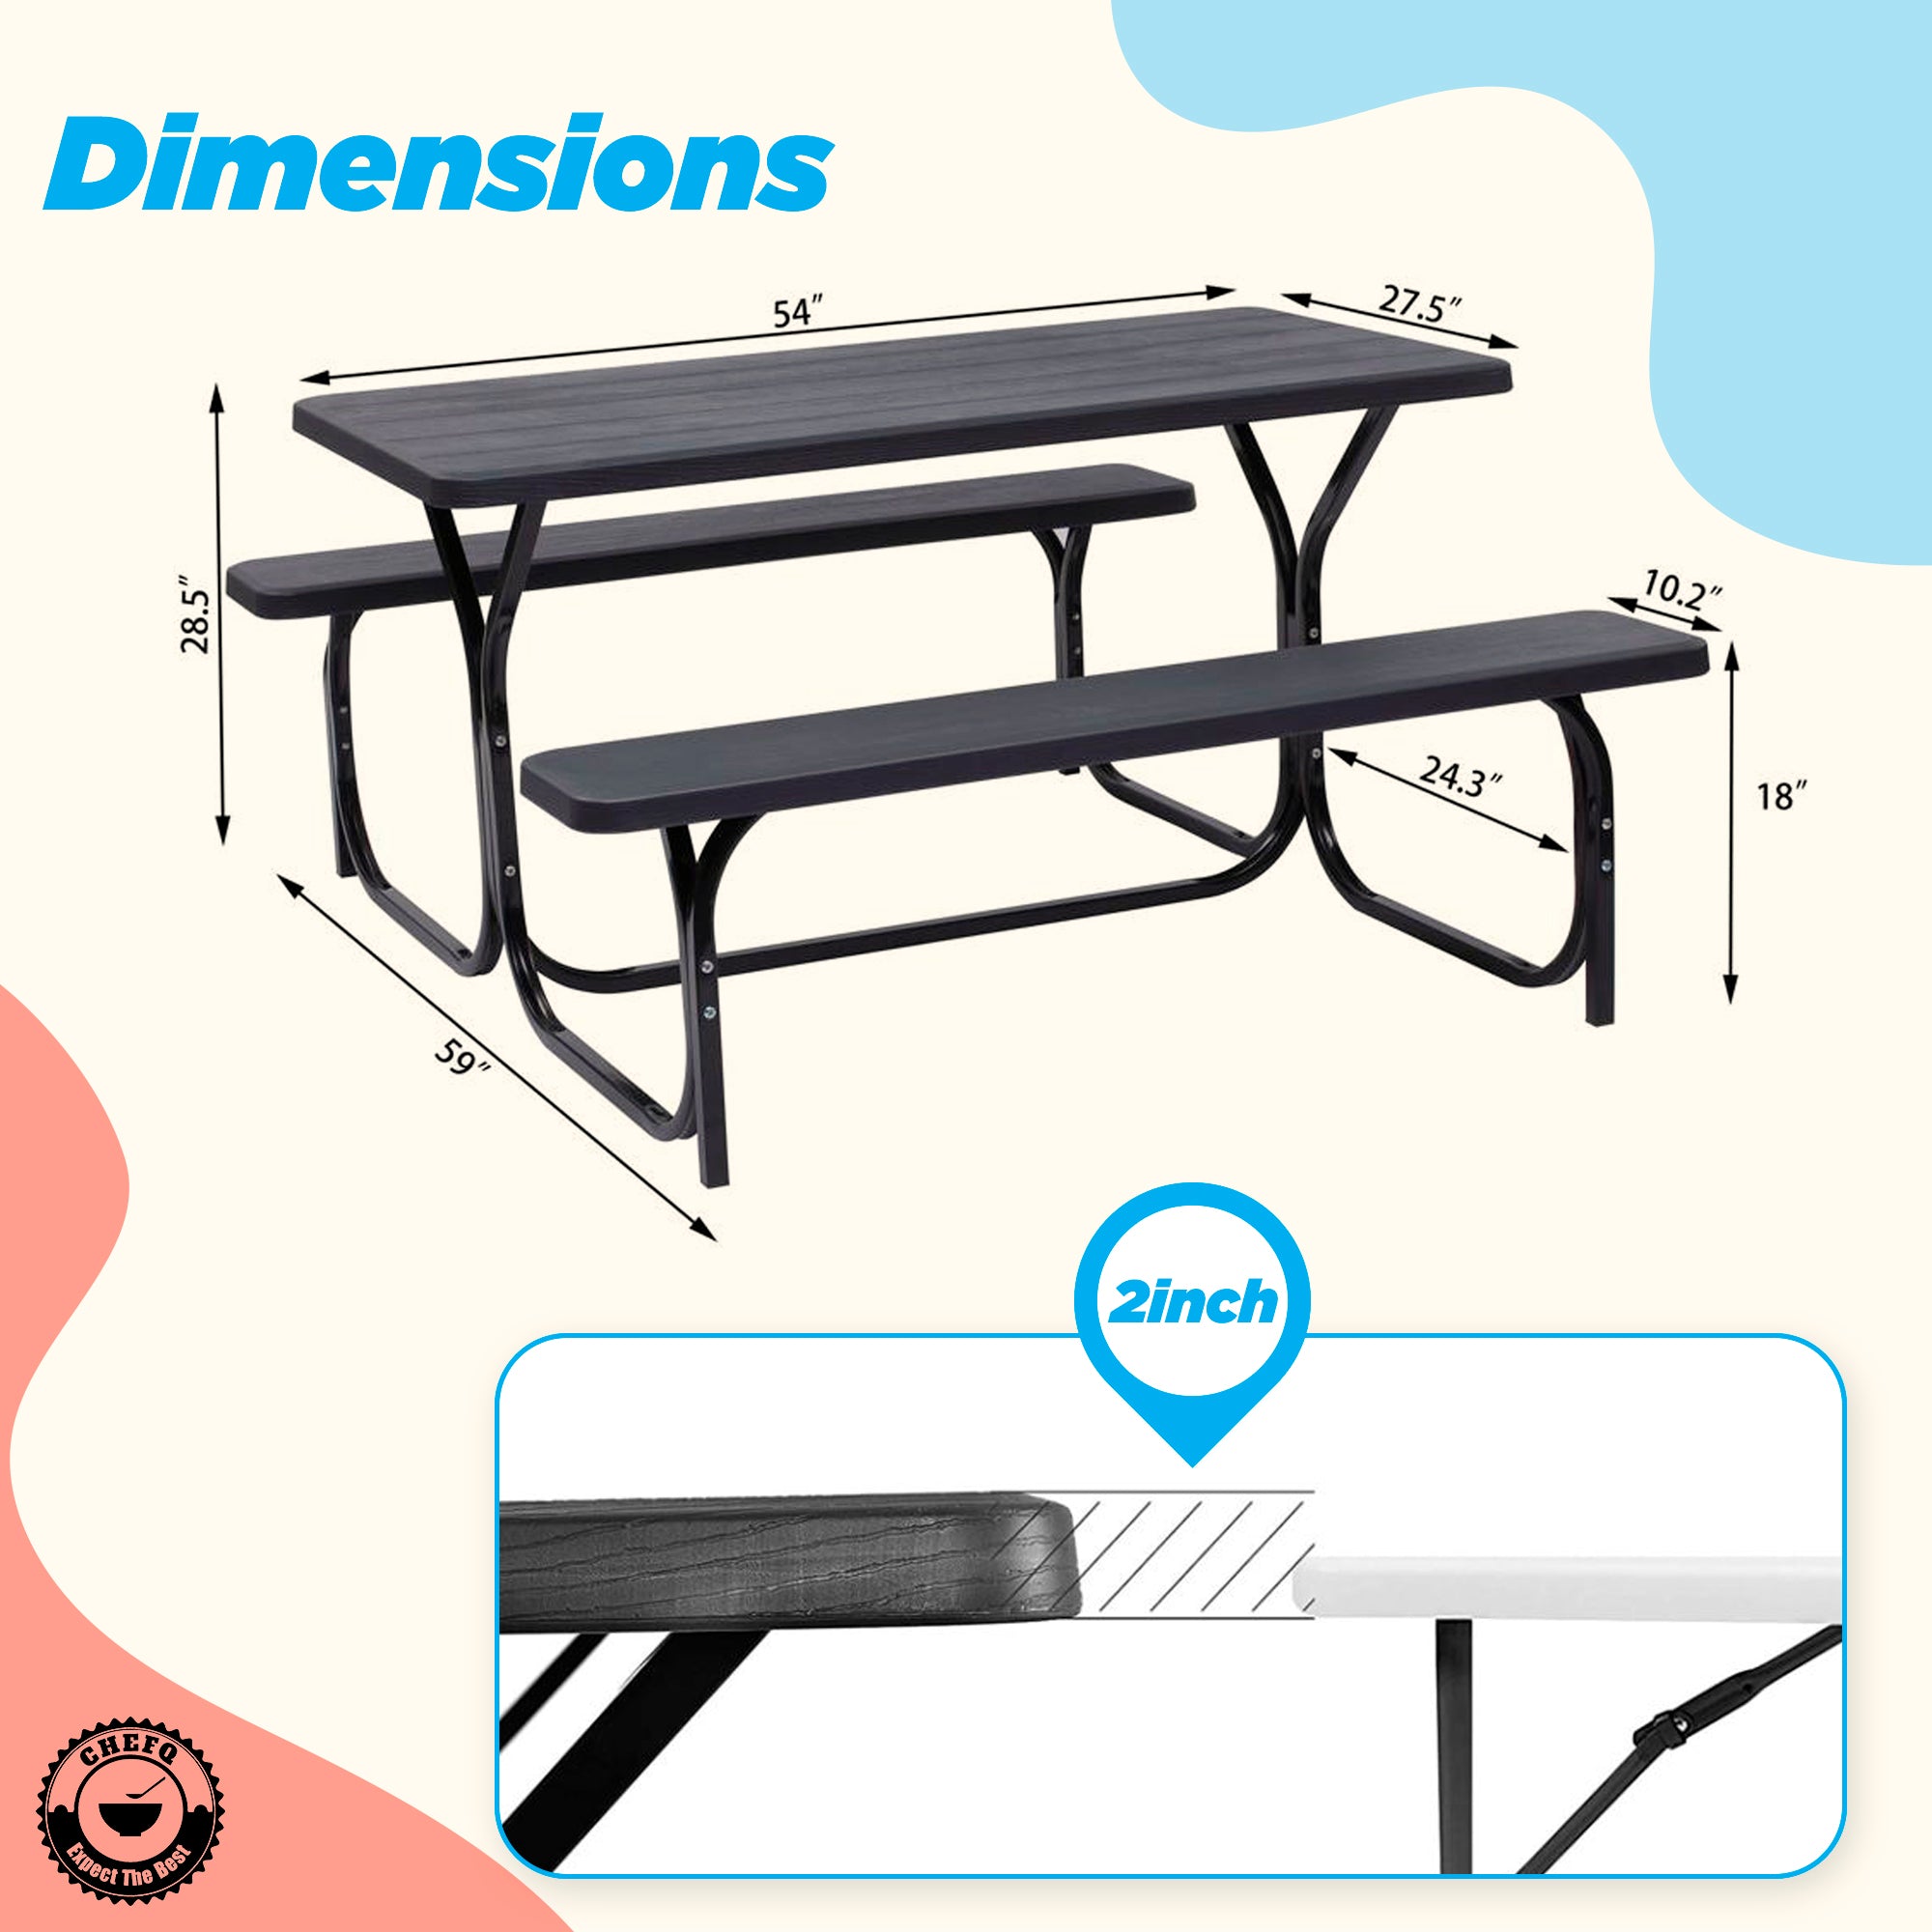 CHEFQ Picnic Table Bench Set Outdoor Camping All Weather Metal Base Wood-Like Texture Backyard Poolside Dining Party Garden Patio Lawn Deck Large Camping Picnic Tables for Adult